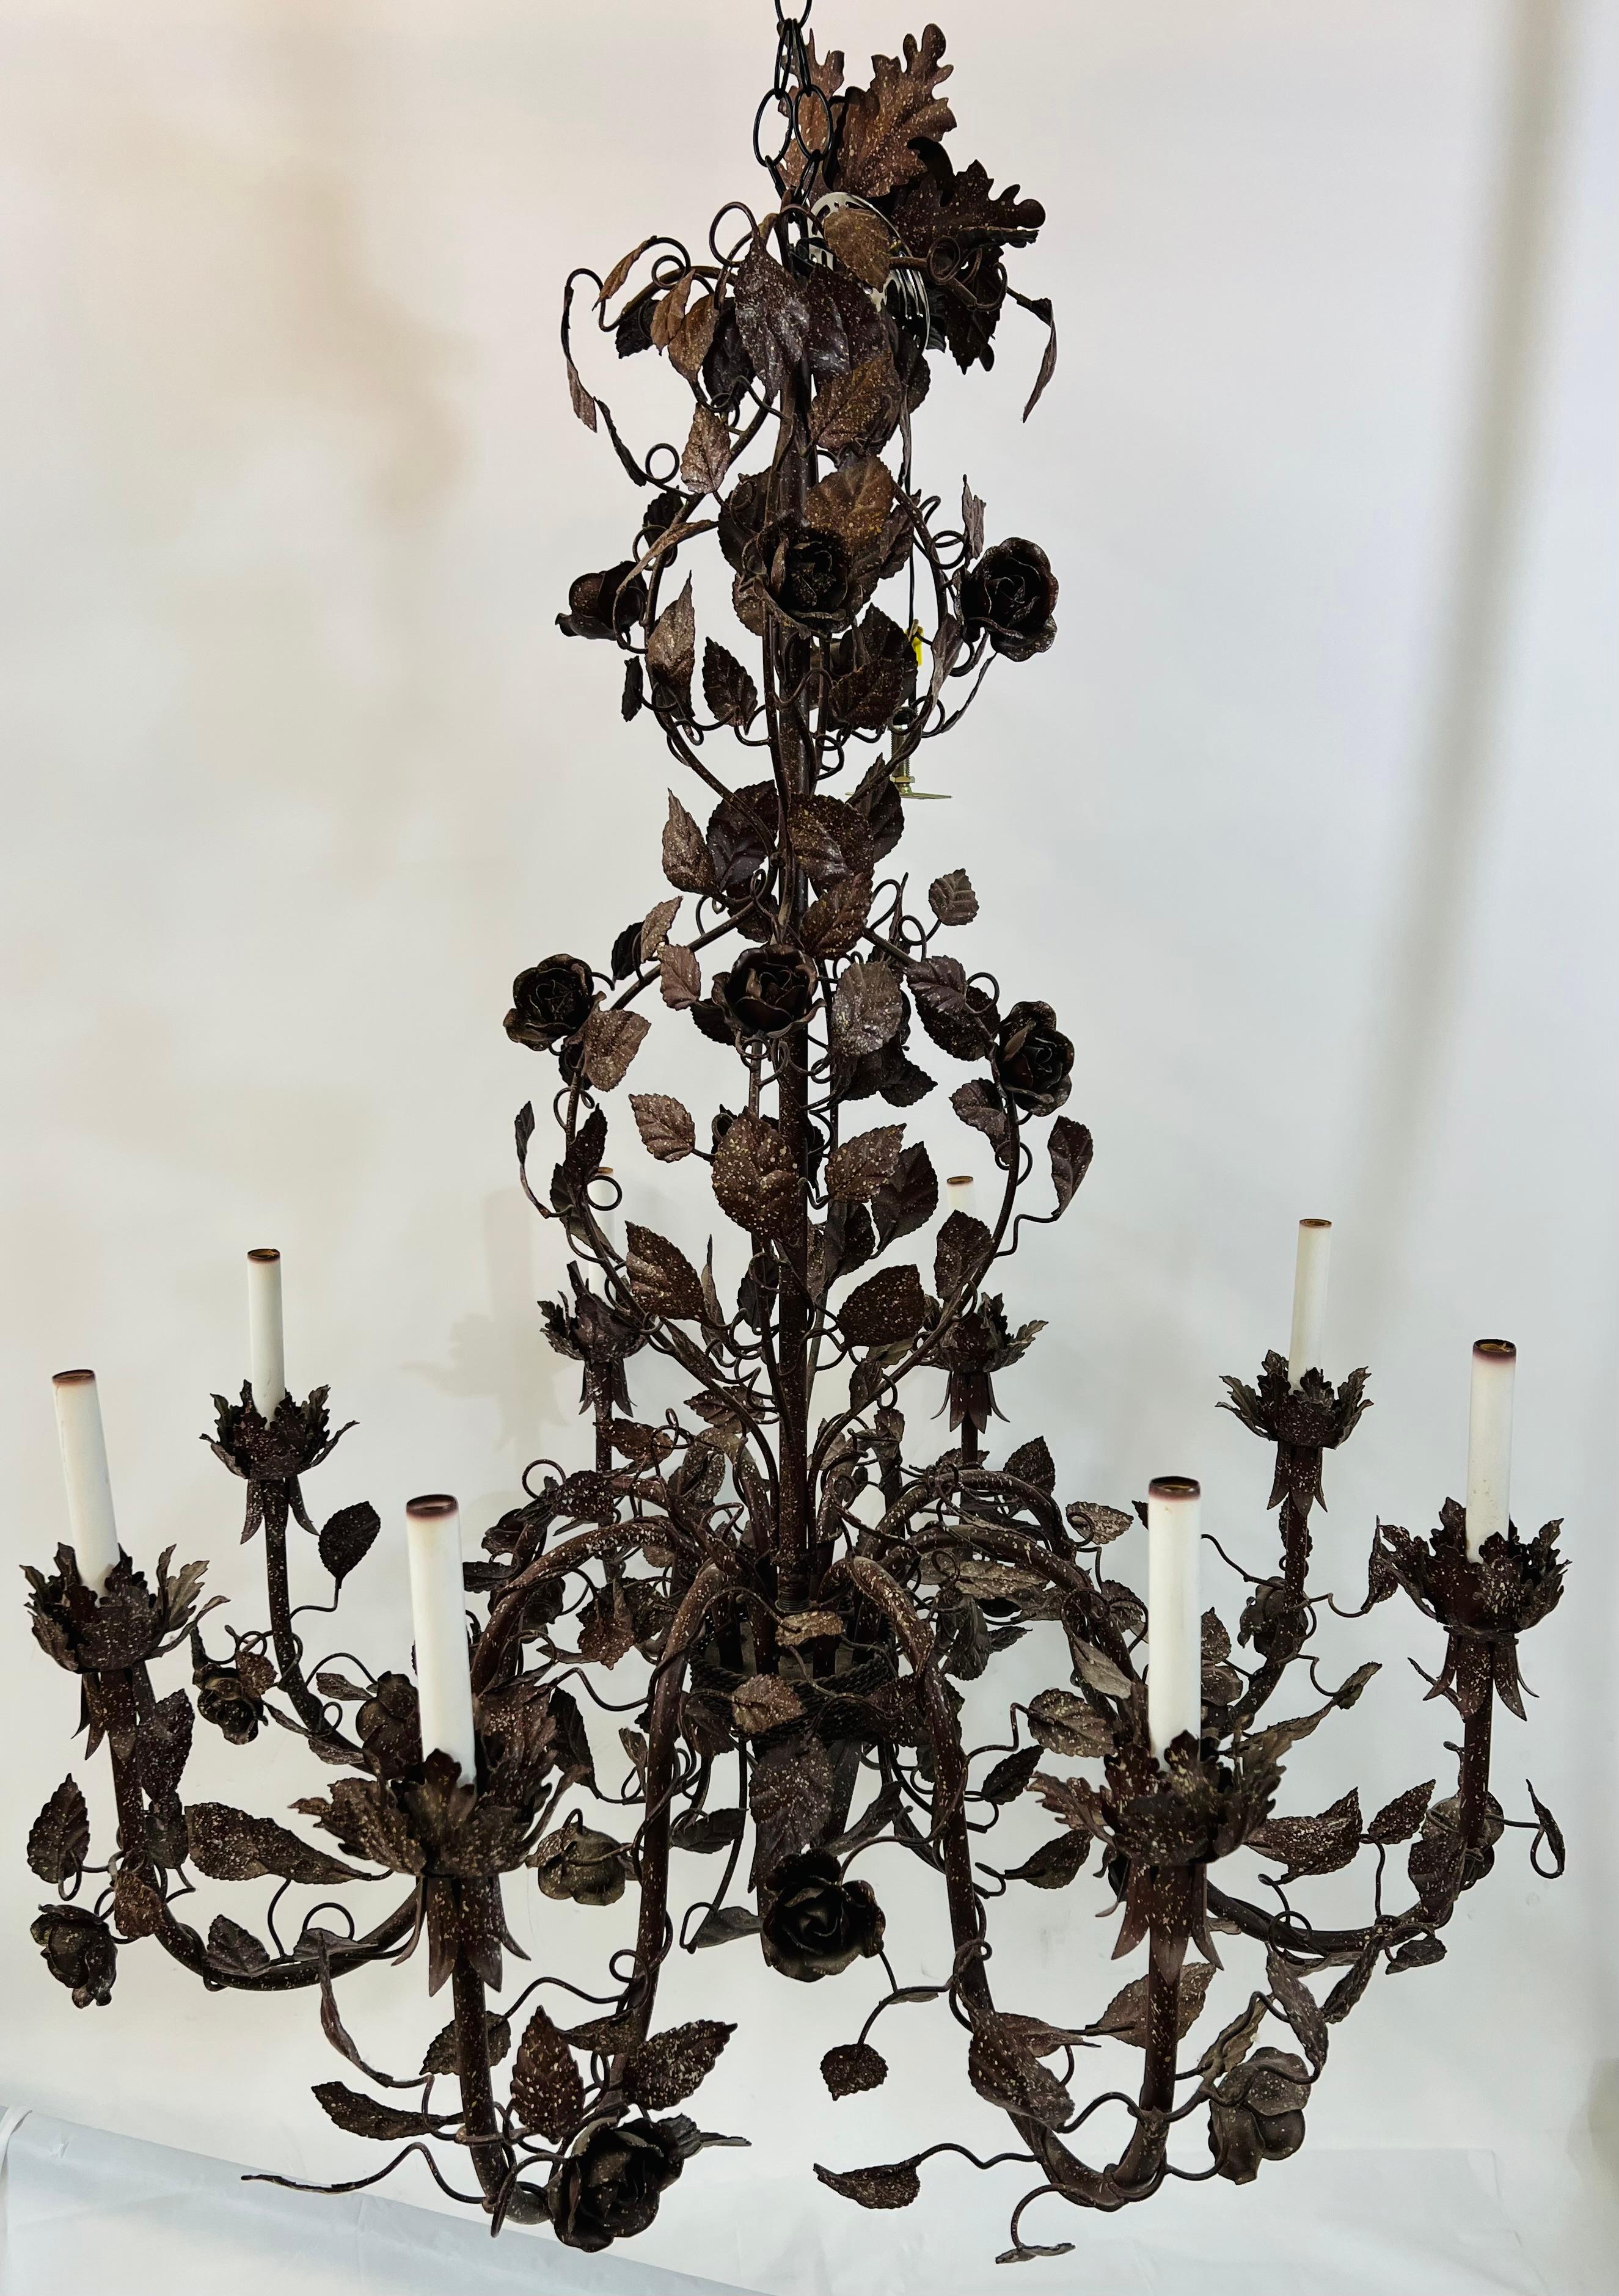 A large 1970's boho chic Italian tole metal chandelier. The hand tooled chandelier features flowers and leaves so beautifully arranged with leaves encircling the column of the chandelier. Hand-painted in dark brown with white spot design, the